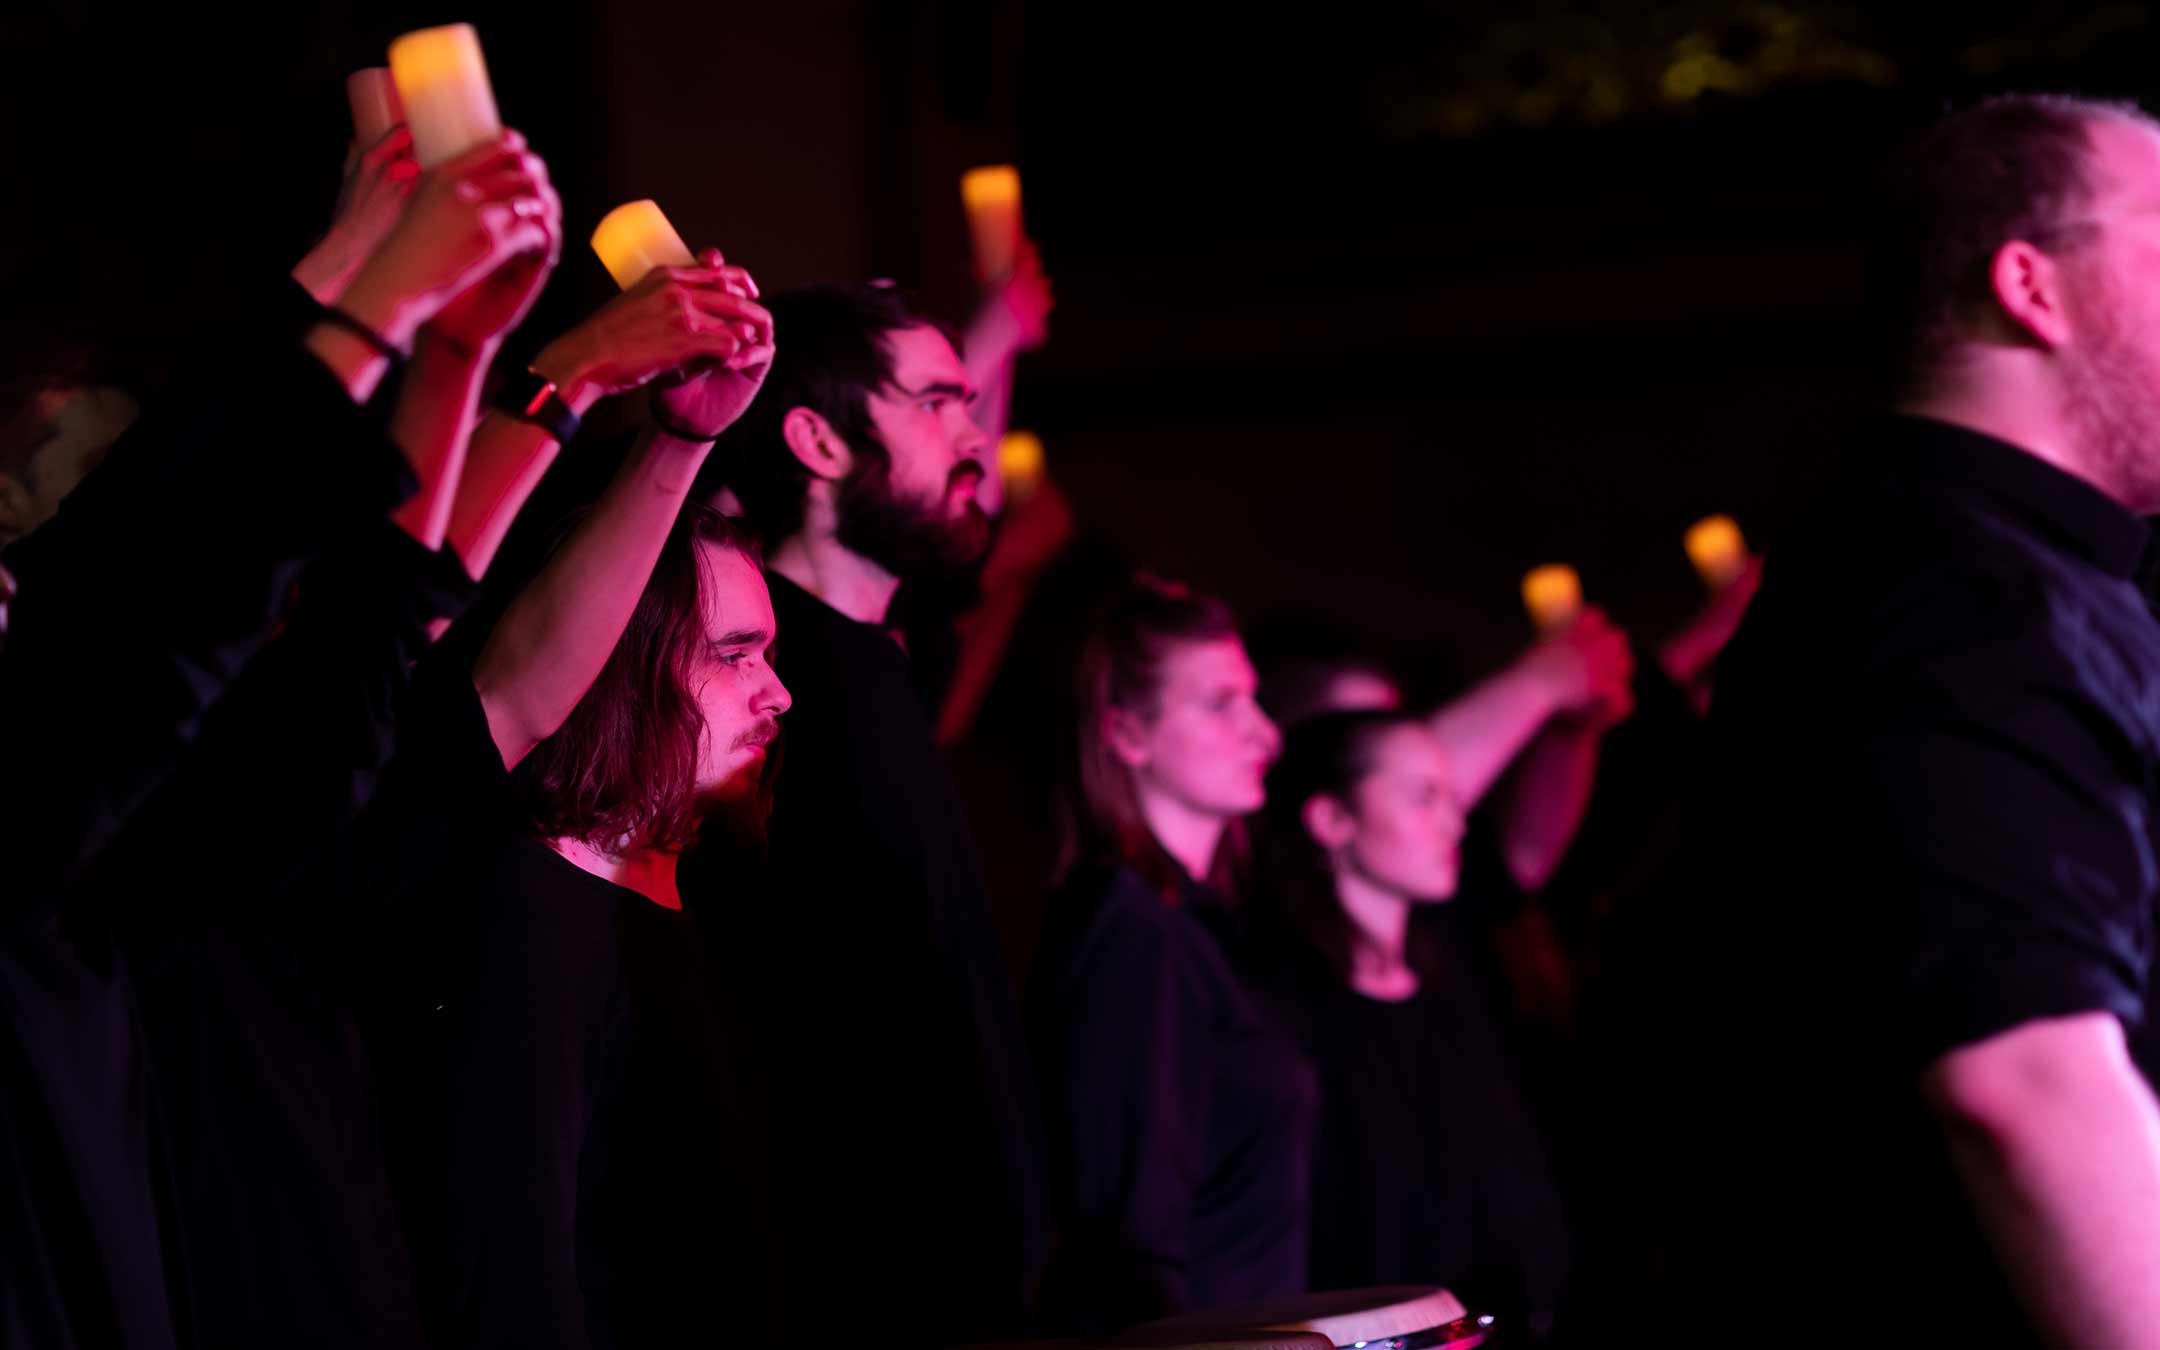 Students in a performance holding candles against a dark background